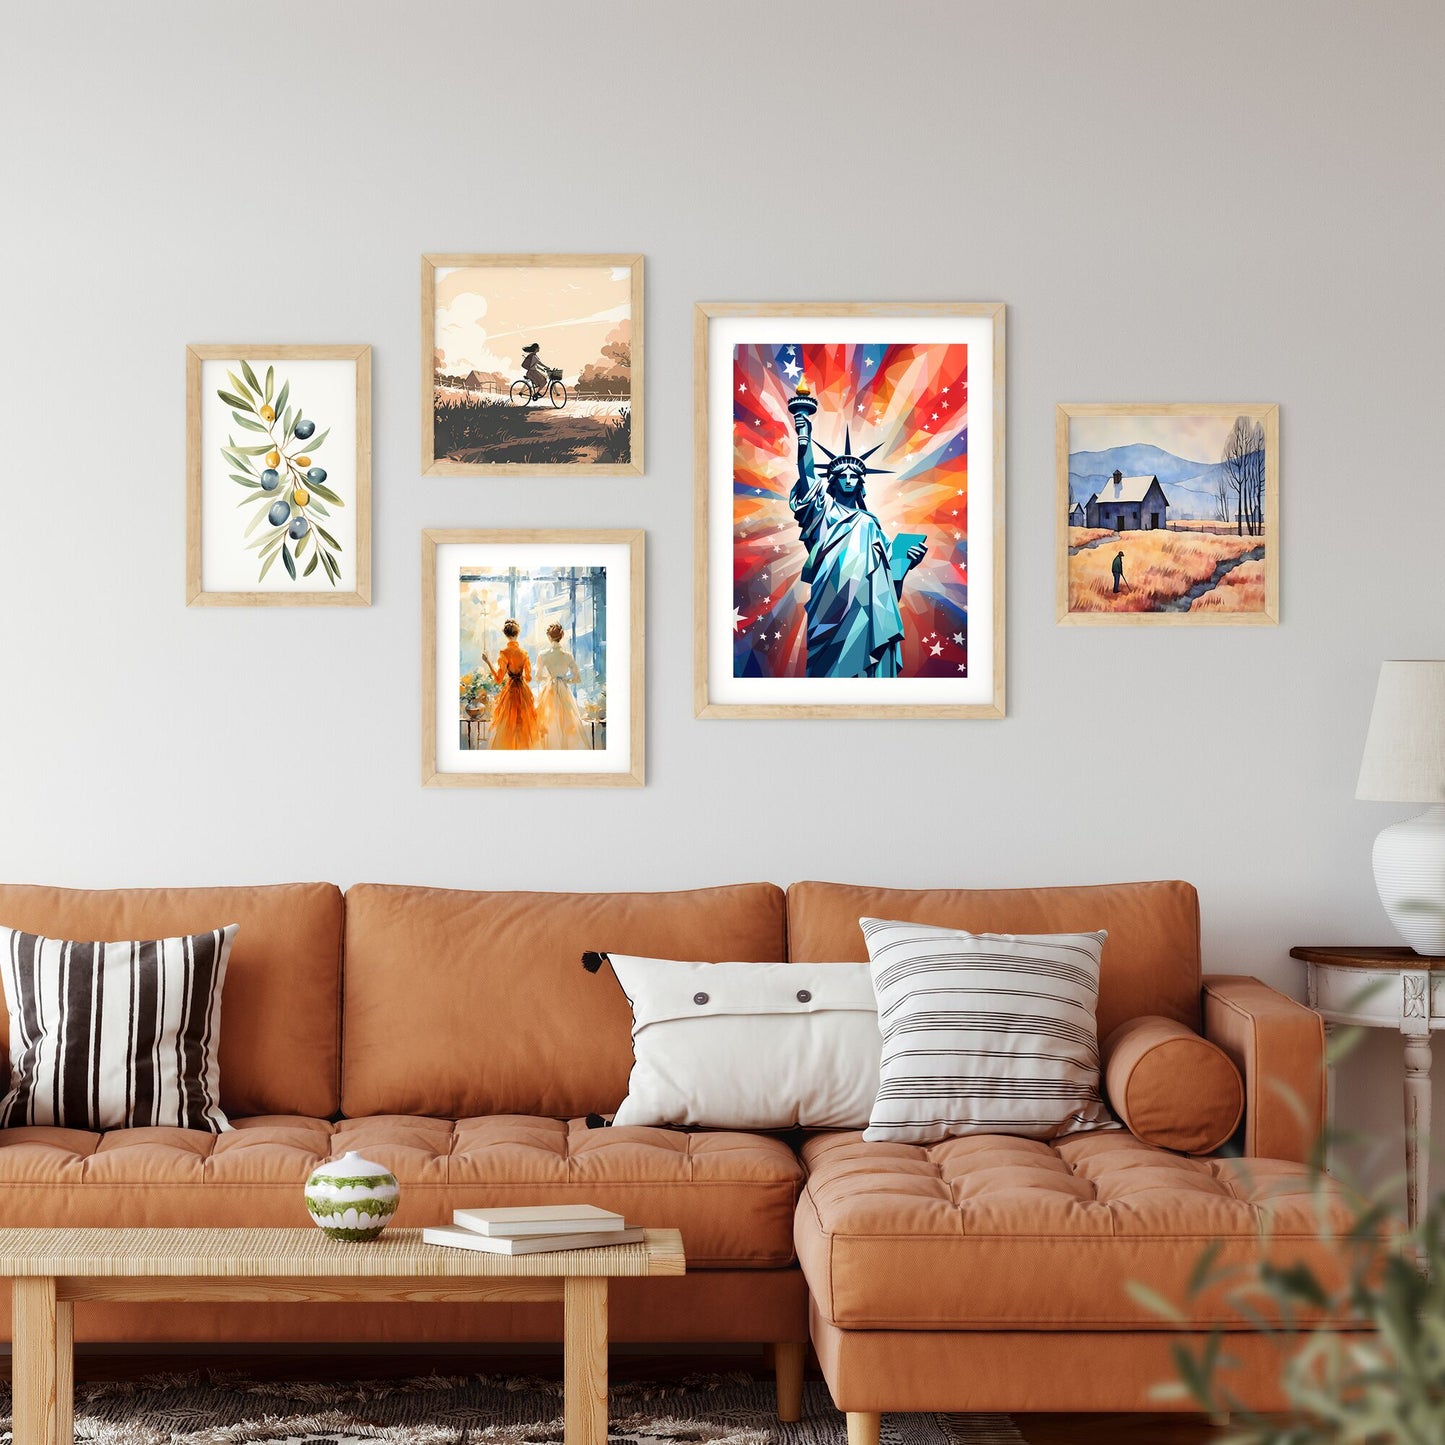 Low Poly Statue Of Liberty Art Print Default Title